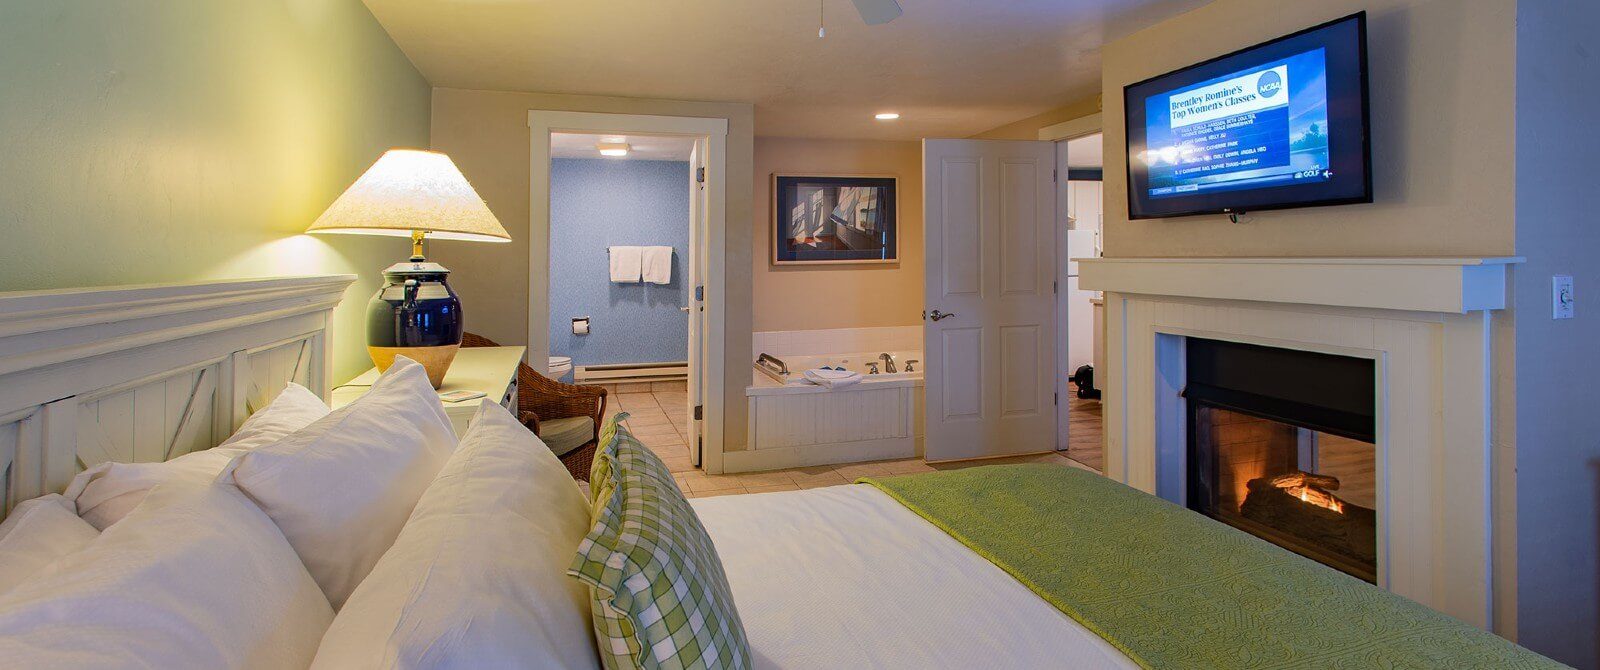 Spacious bedroom with king bed in front of a gas fireplace, TV above and jacuzzi tub in corner